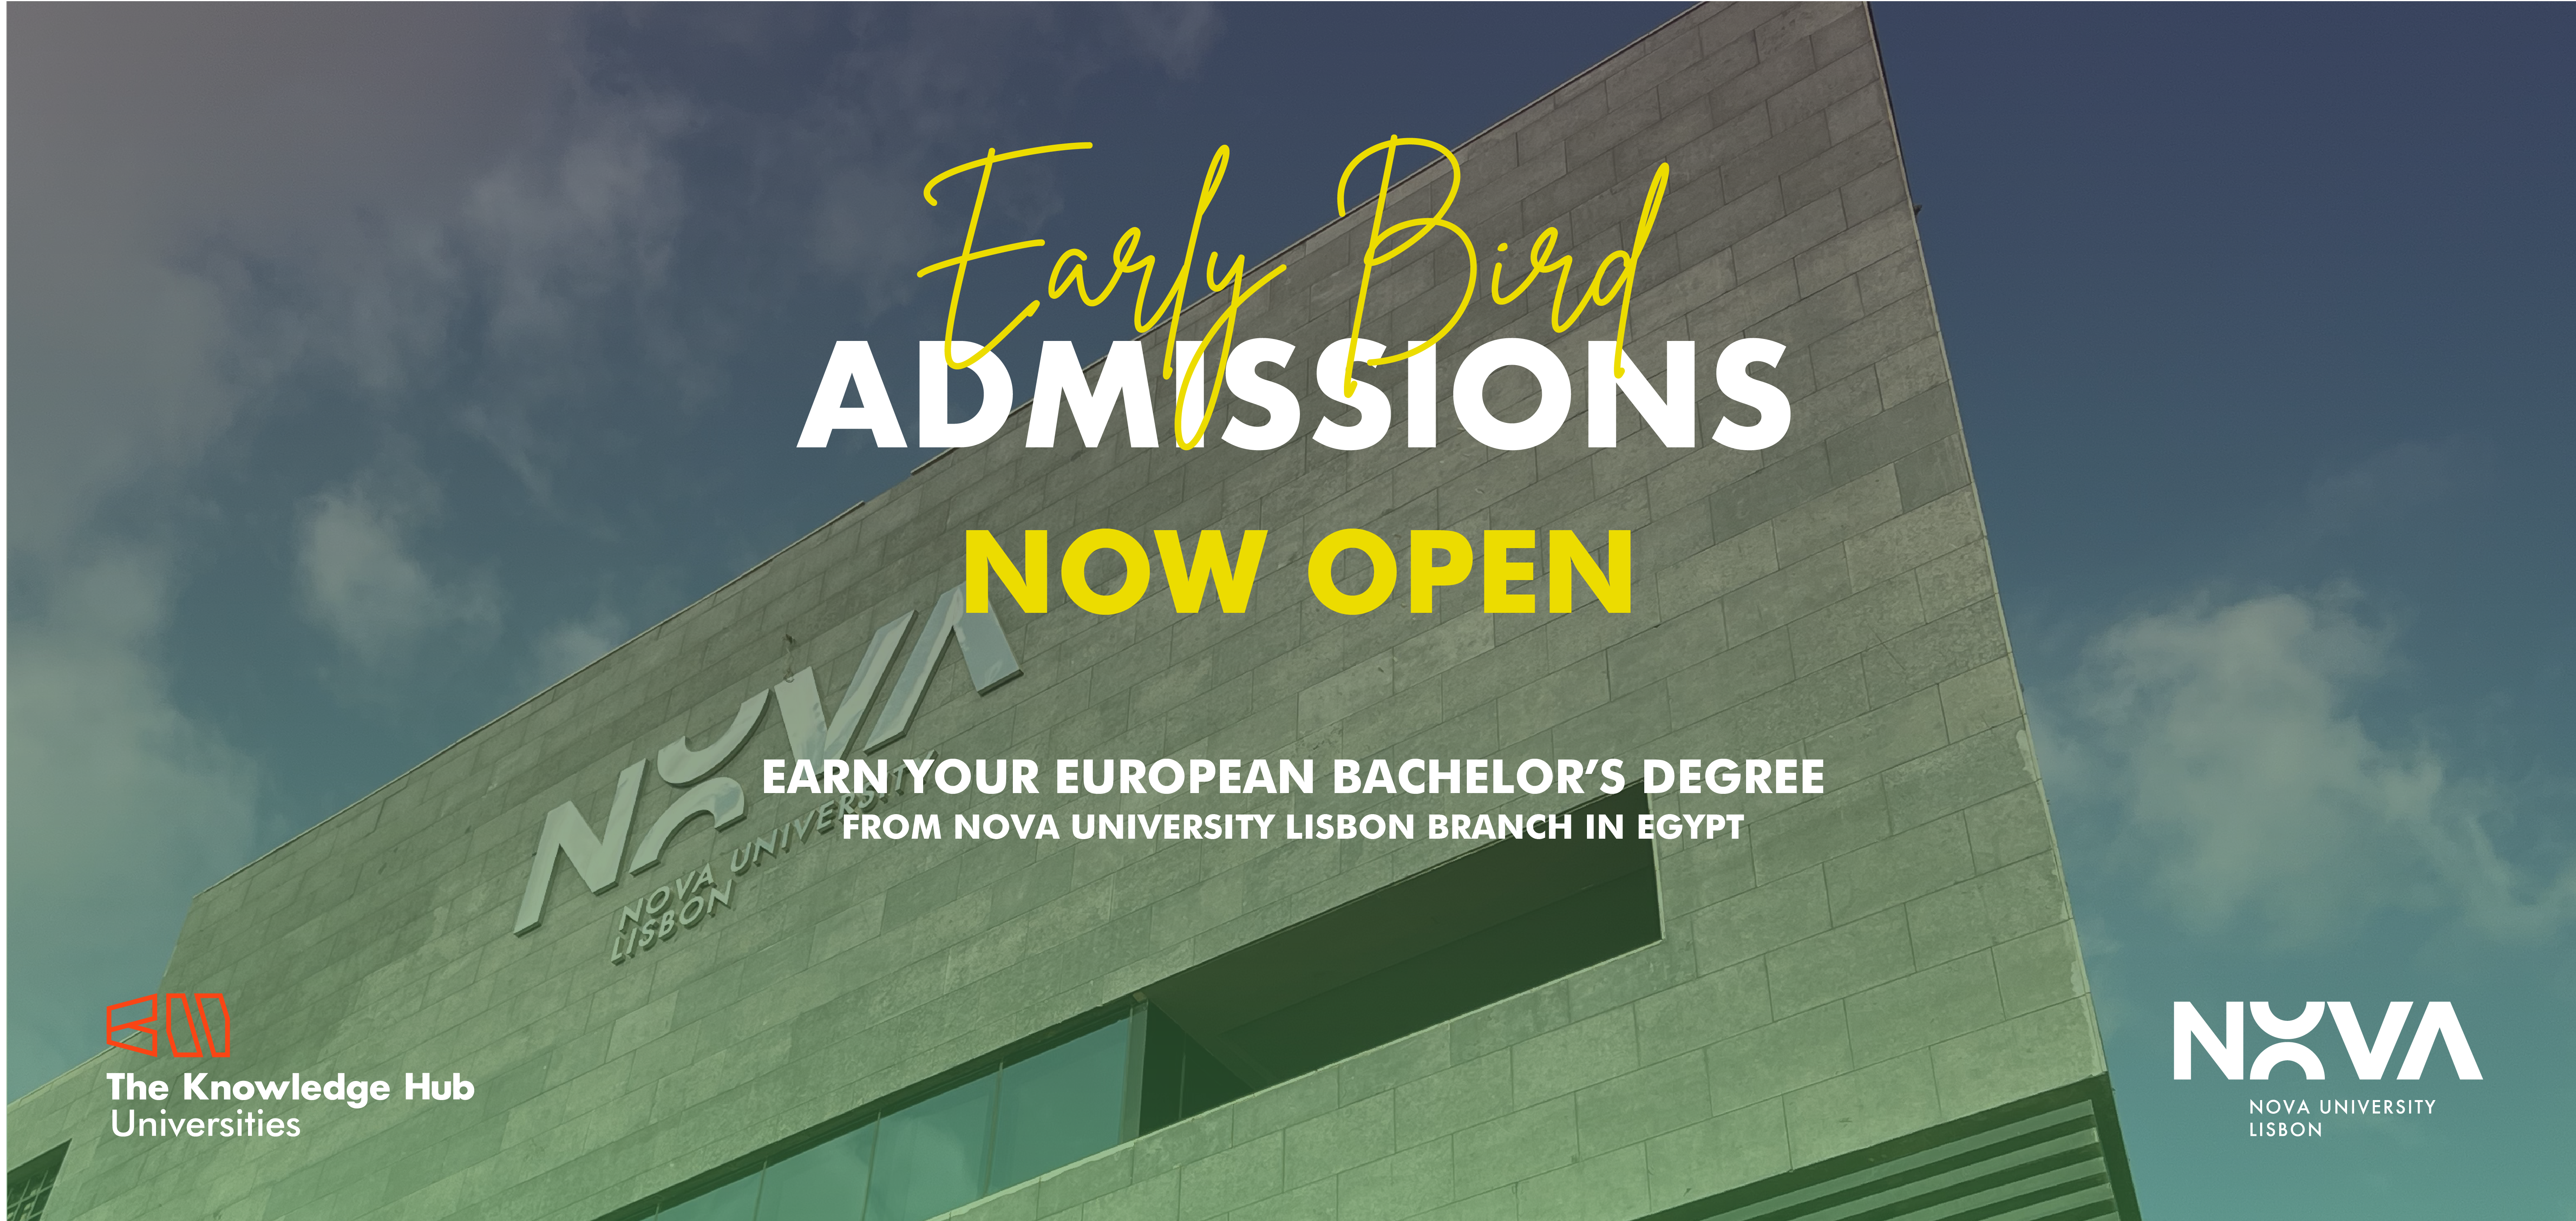 Early Bird Admissions Now Open For NOVA University Lisbon Branch in Egypt